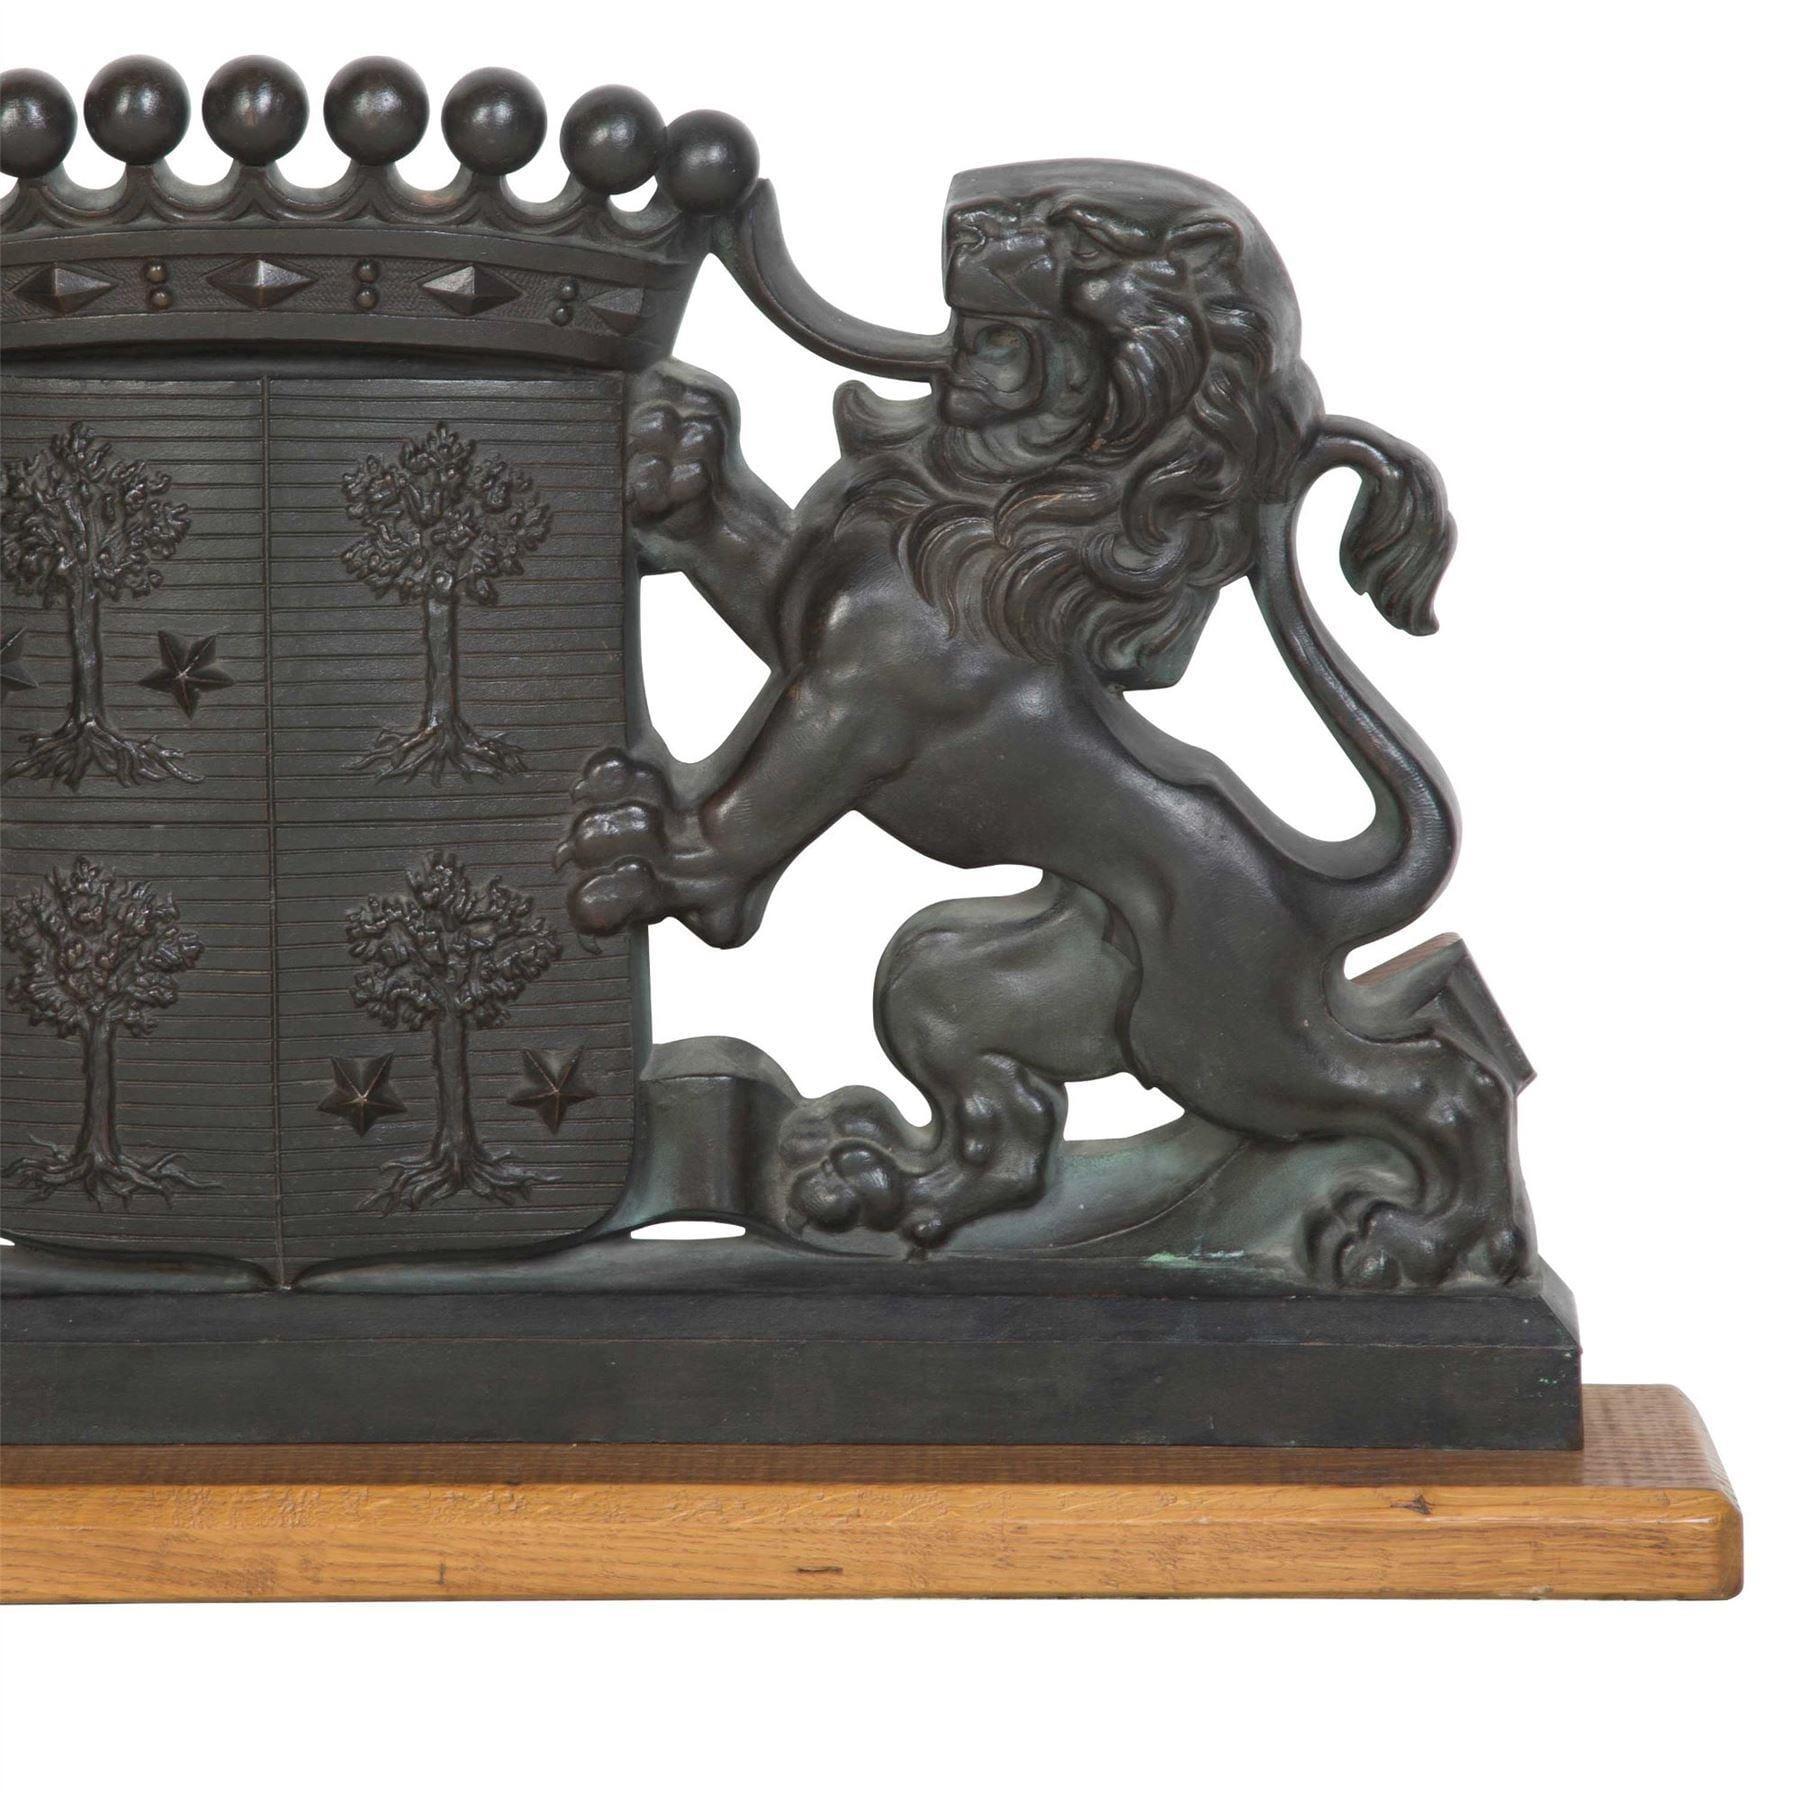 
Home / Stock / Rare C19th Bronze Coat Of Arms
PrevNext
A rare and well defined mid C19th large bronze coat of arms featuring the family crest flanked by rampant lions, mounted on later oak plinth. Good rich patination.

Originally adorning the